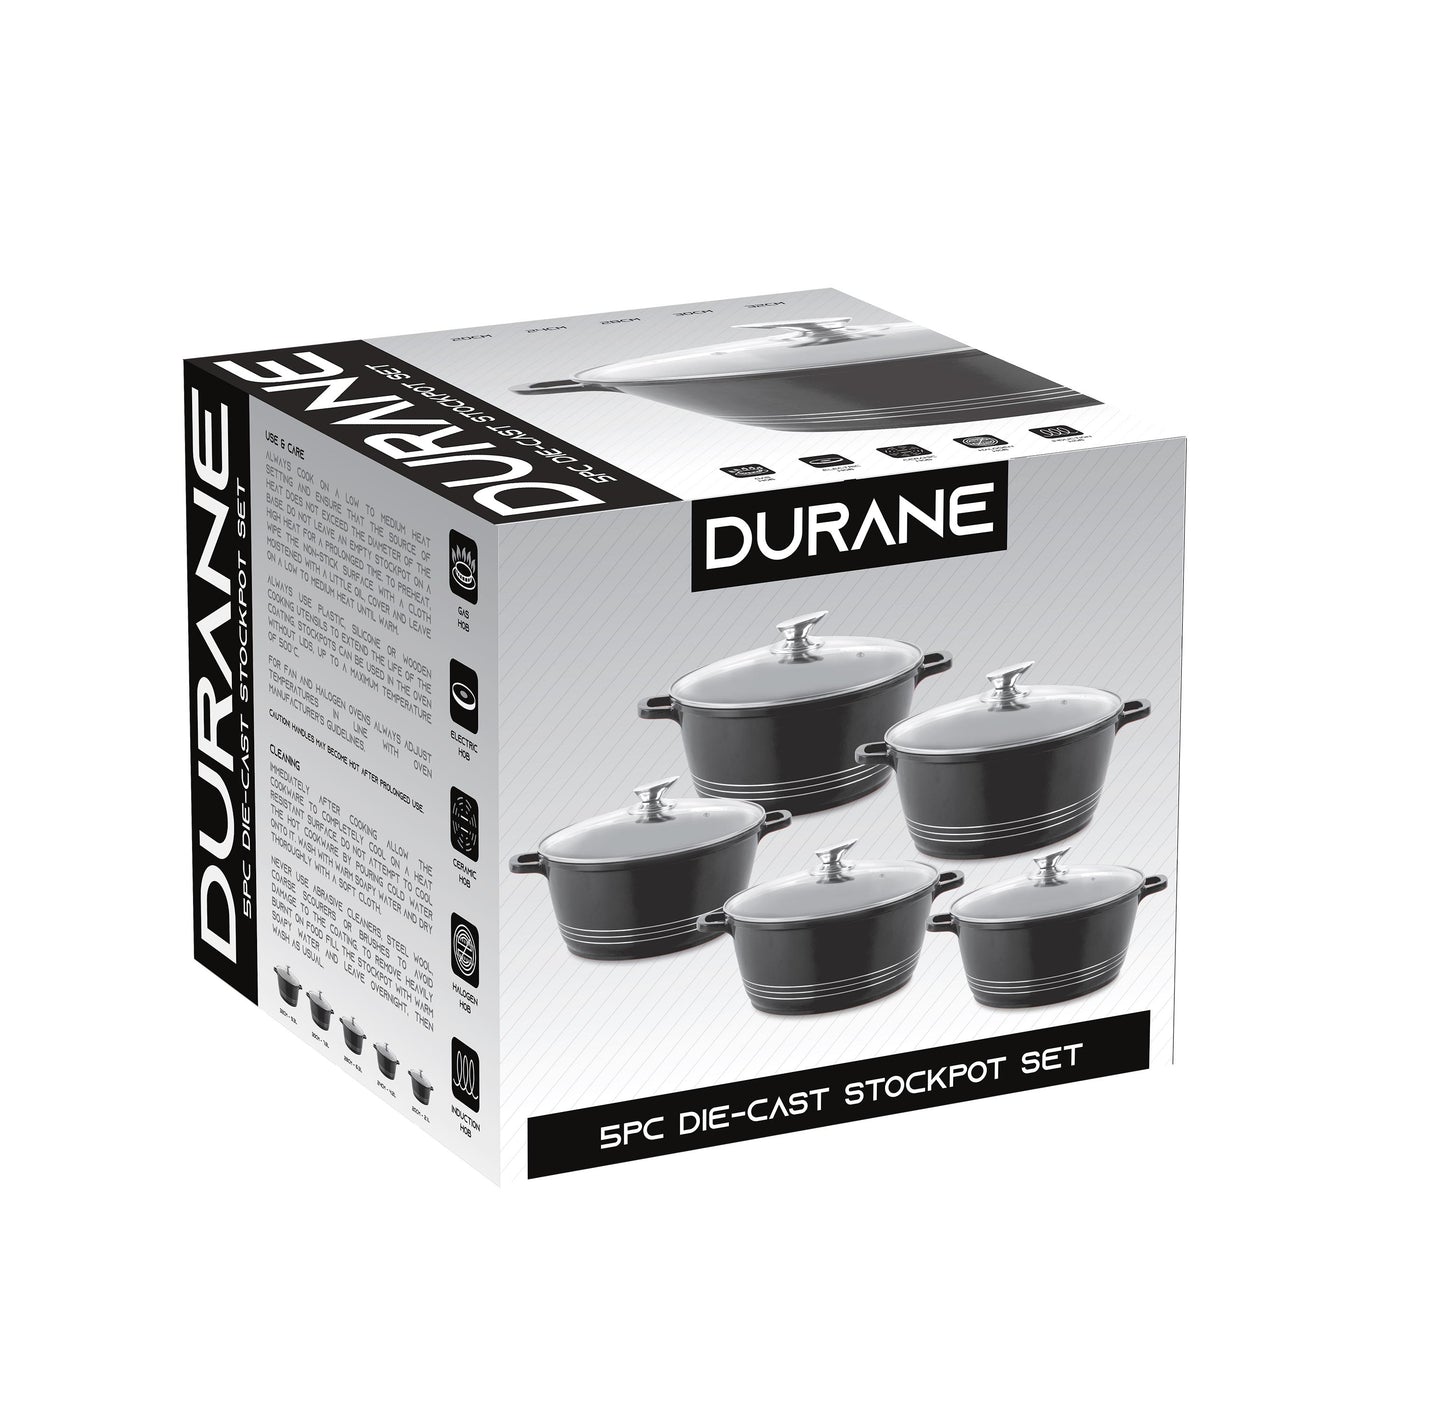 Durane Die Cast Stock Pot Set Of 5 Stainless Steel Non Stick Coating And Handle 9317 (Big Parcel Rate)